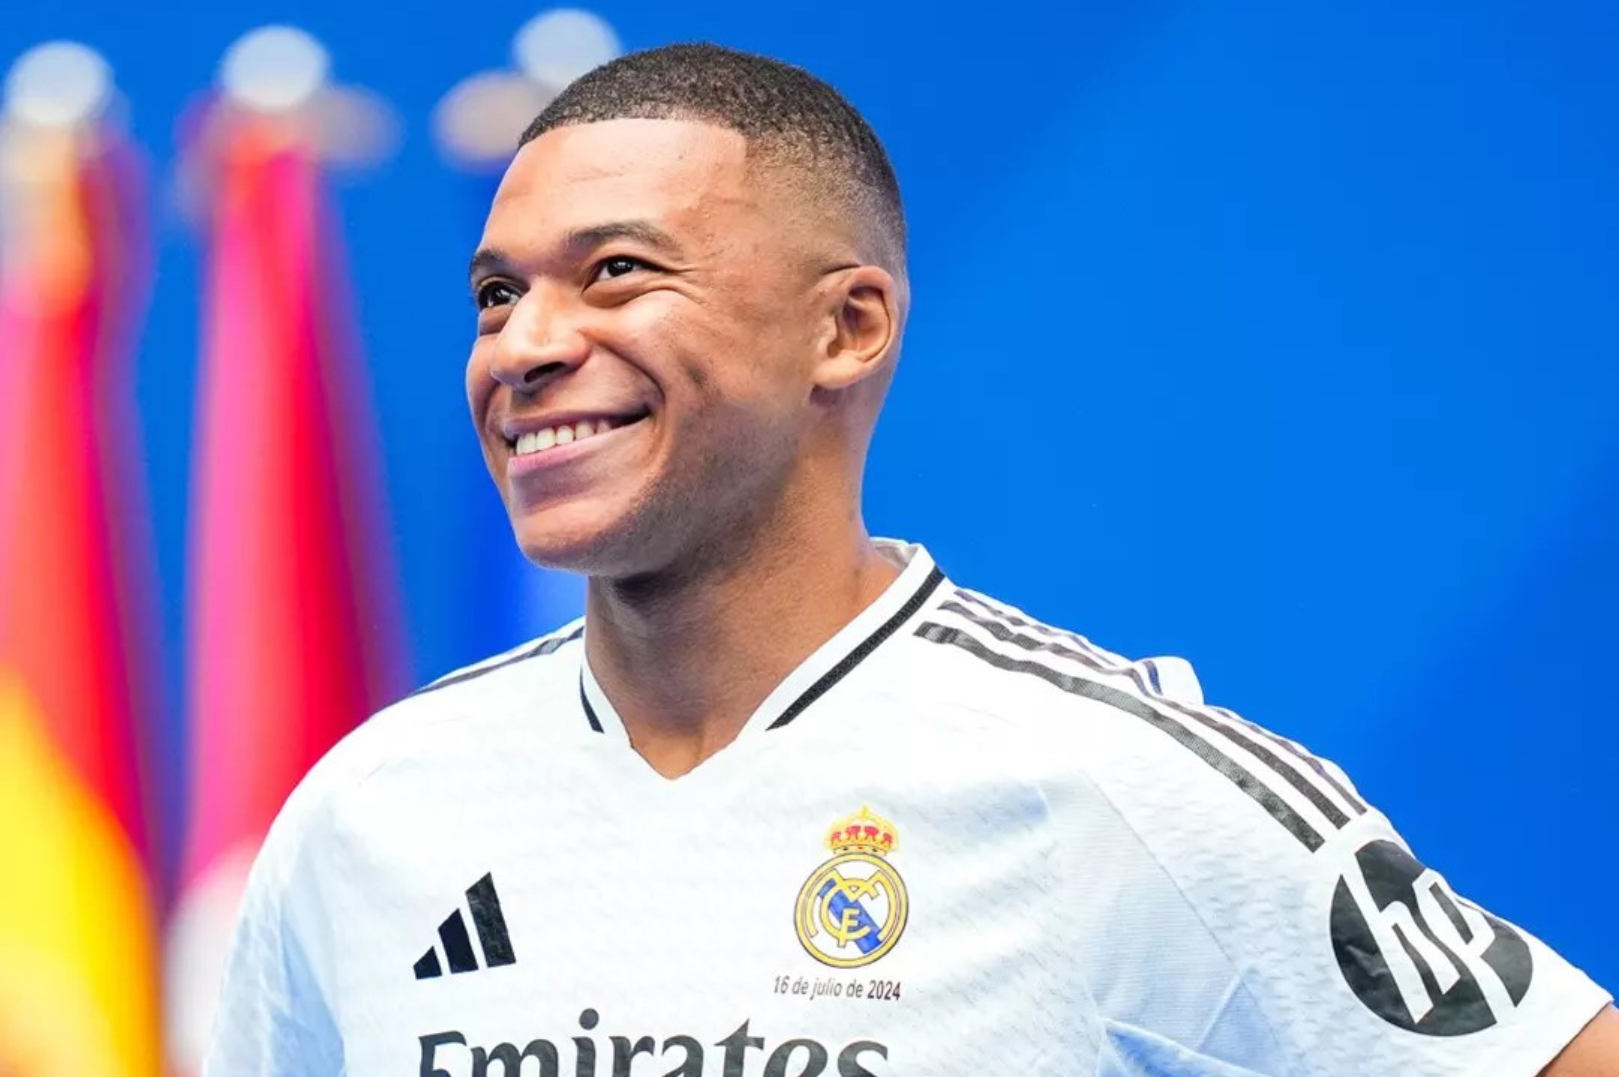 Kylian Mbappé Joins Real Madrid: A Dream Come True